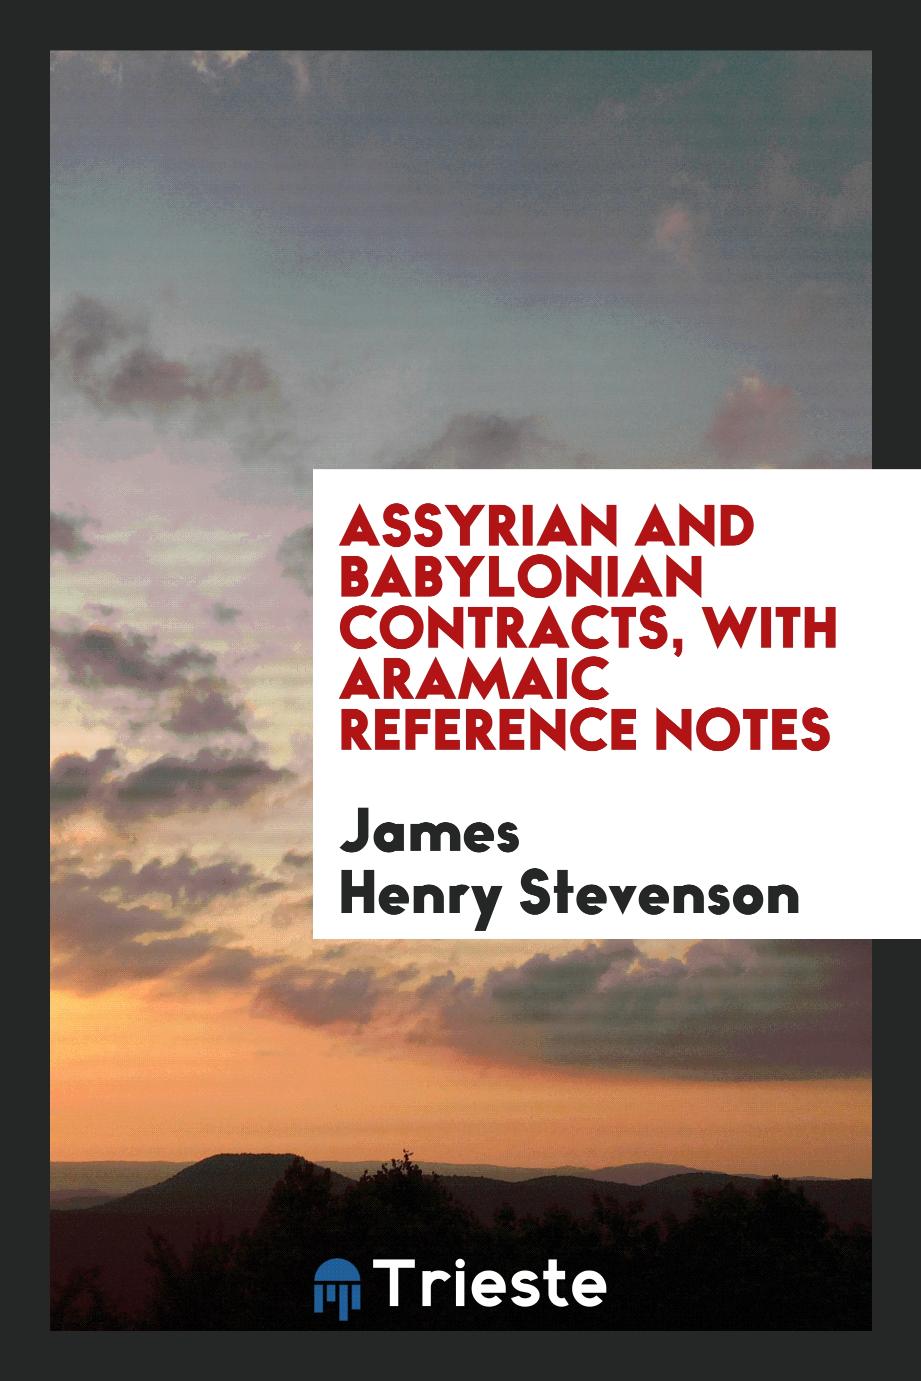 Assyrian and Babylonian contracts, with Aramaic reference notes